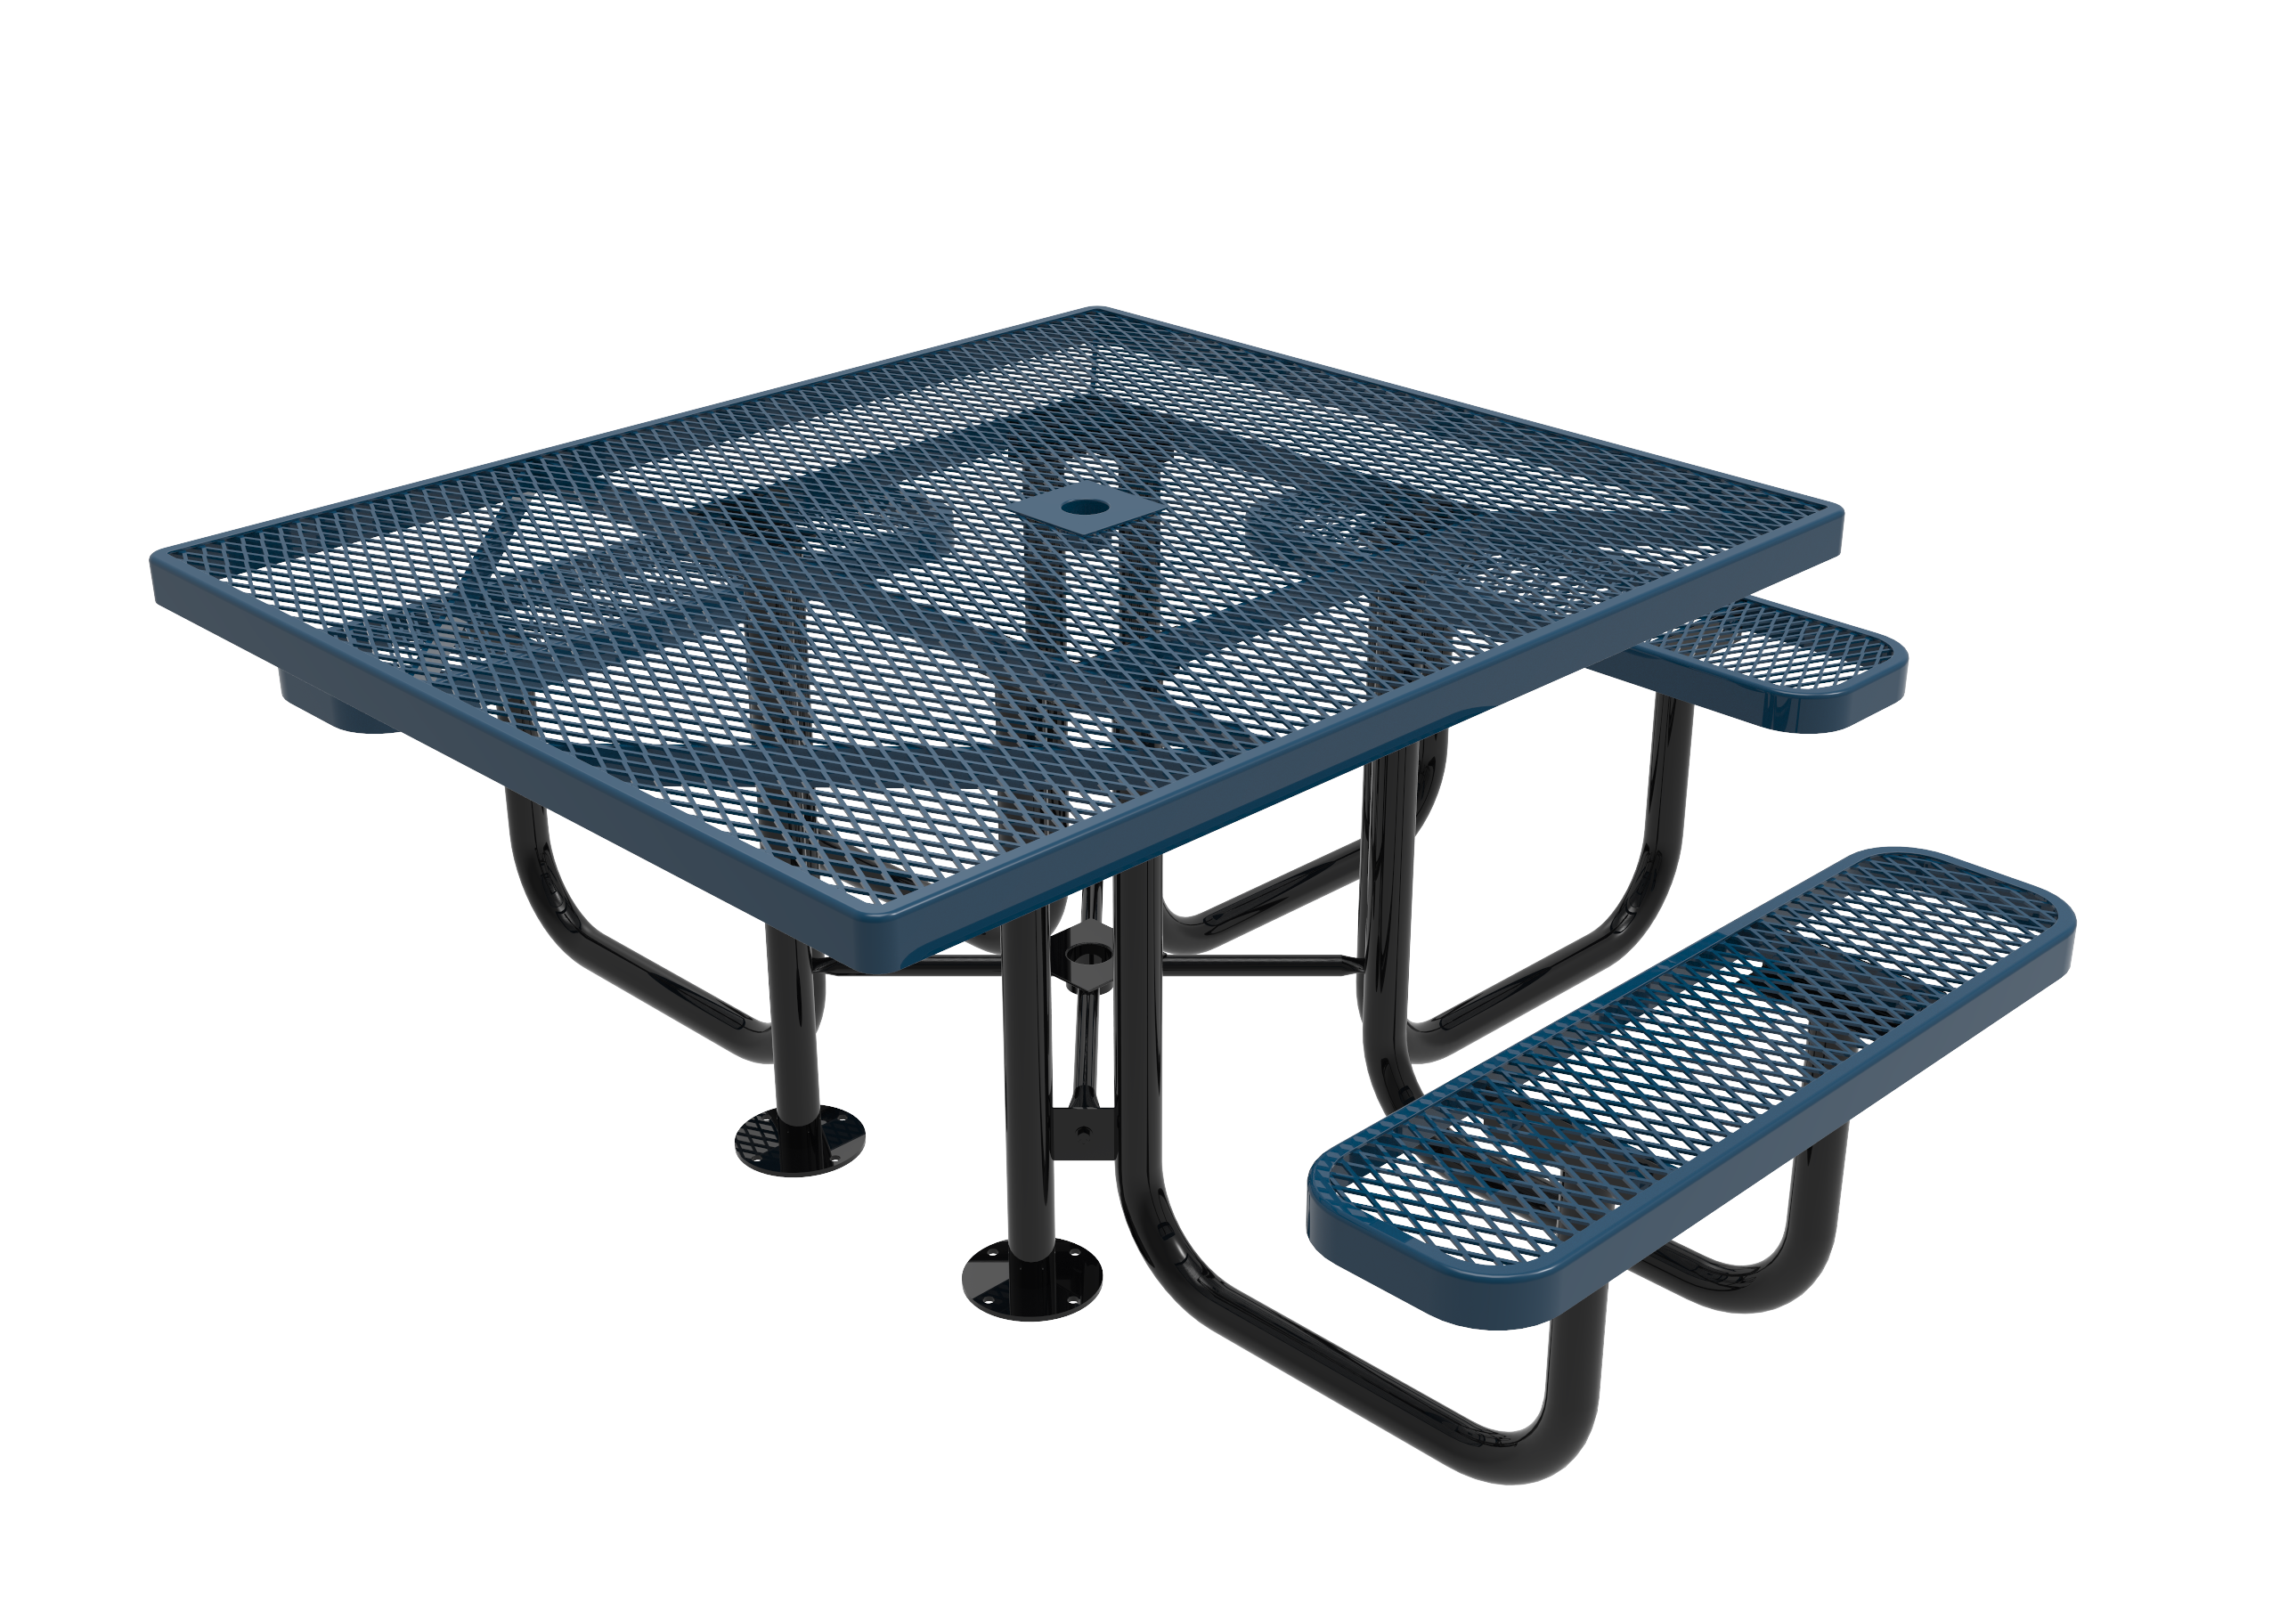 Lexington Square Portable Table - ADA Accessible, Frame with Powder Coat Finish, Top and Seats with Advanced DuraLex Coating